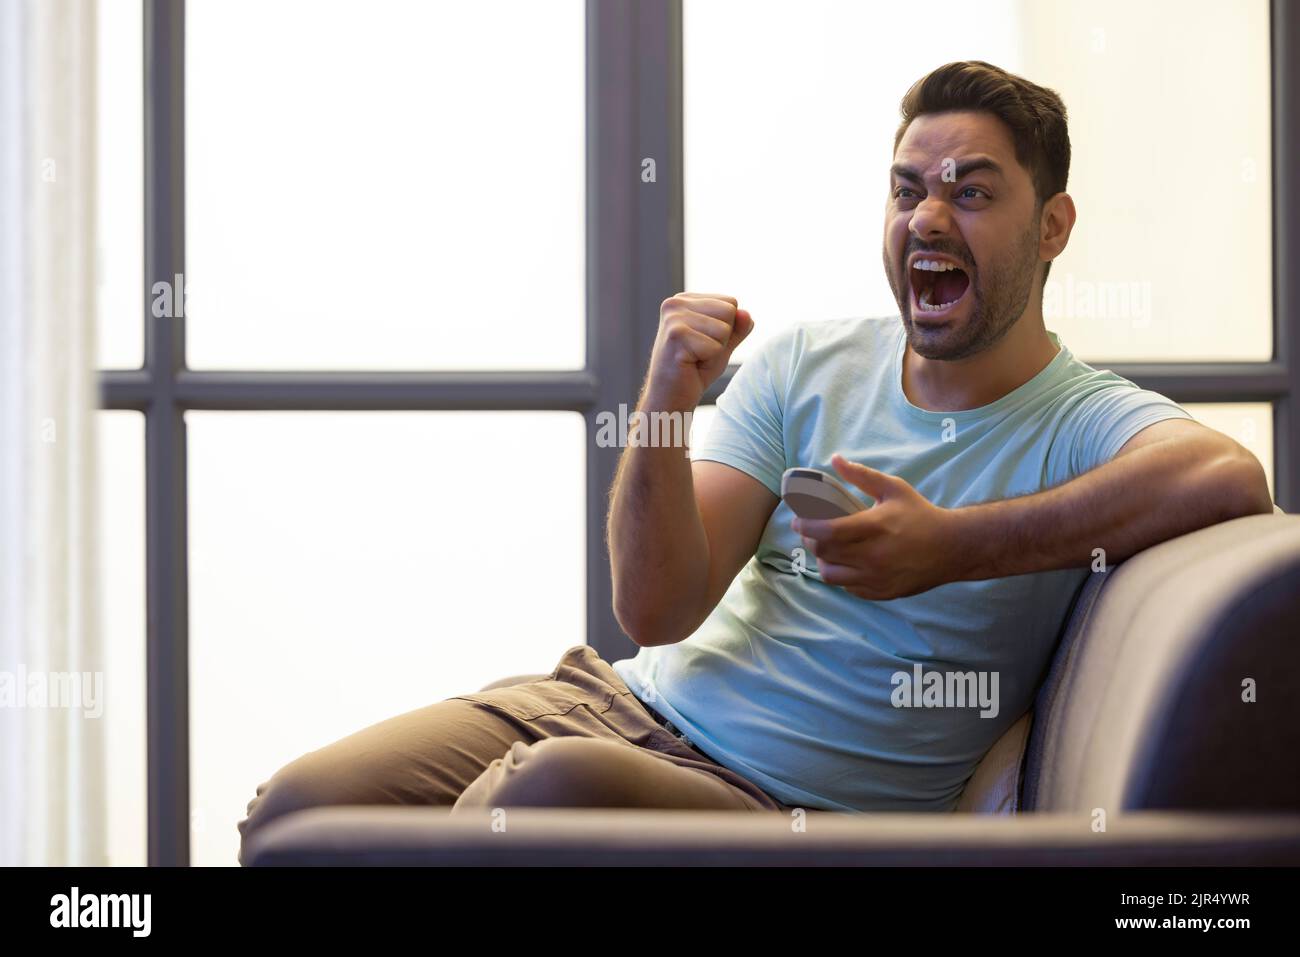 Excited man cheering while watching TV at home Stock Photo